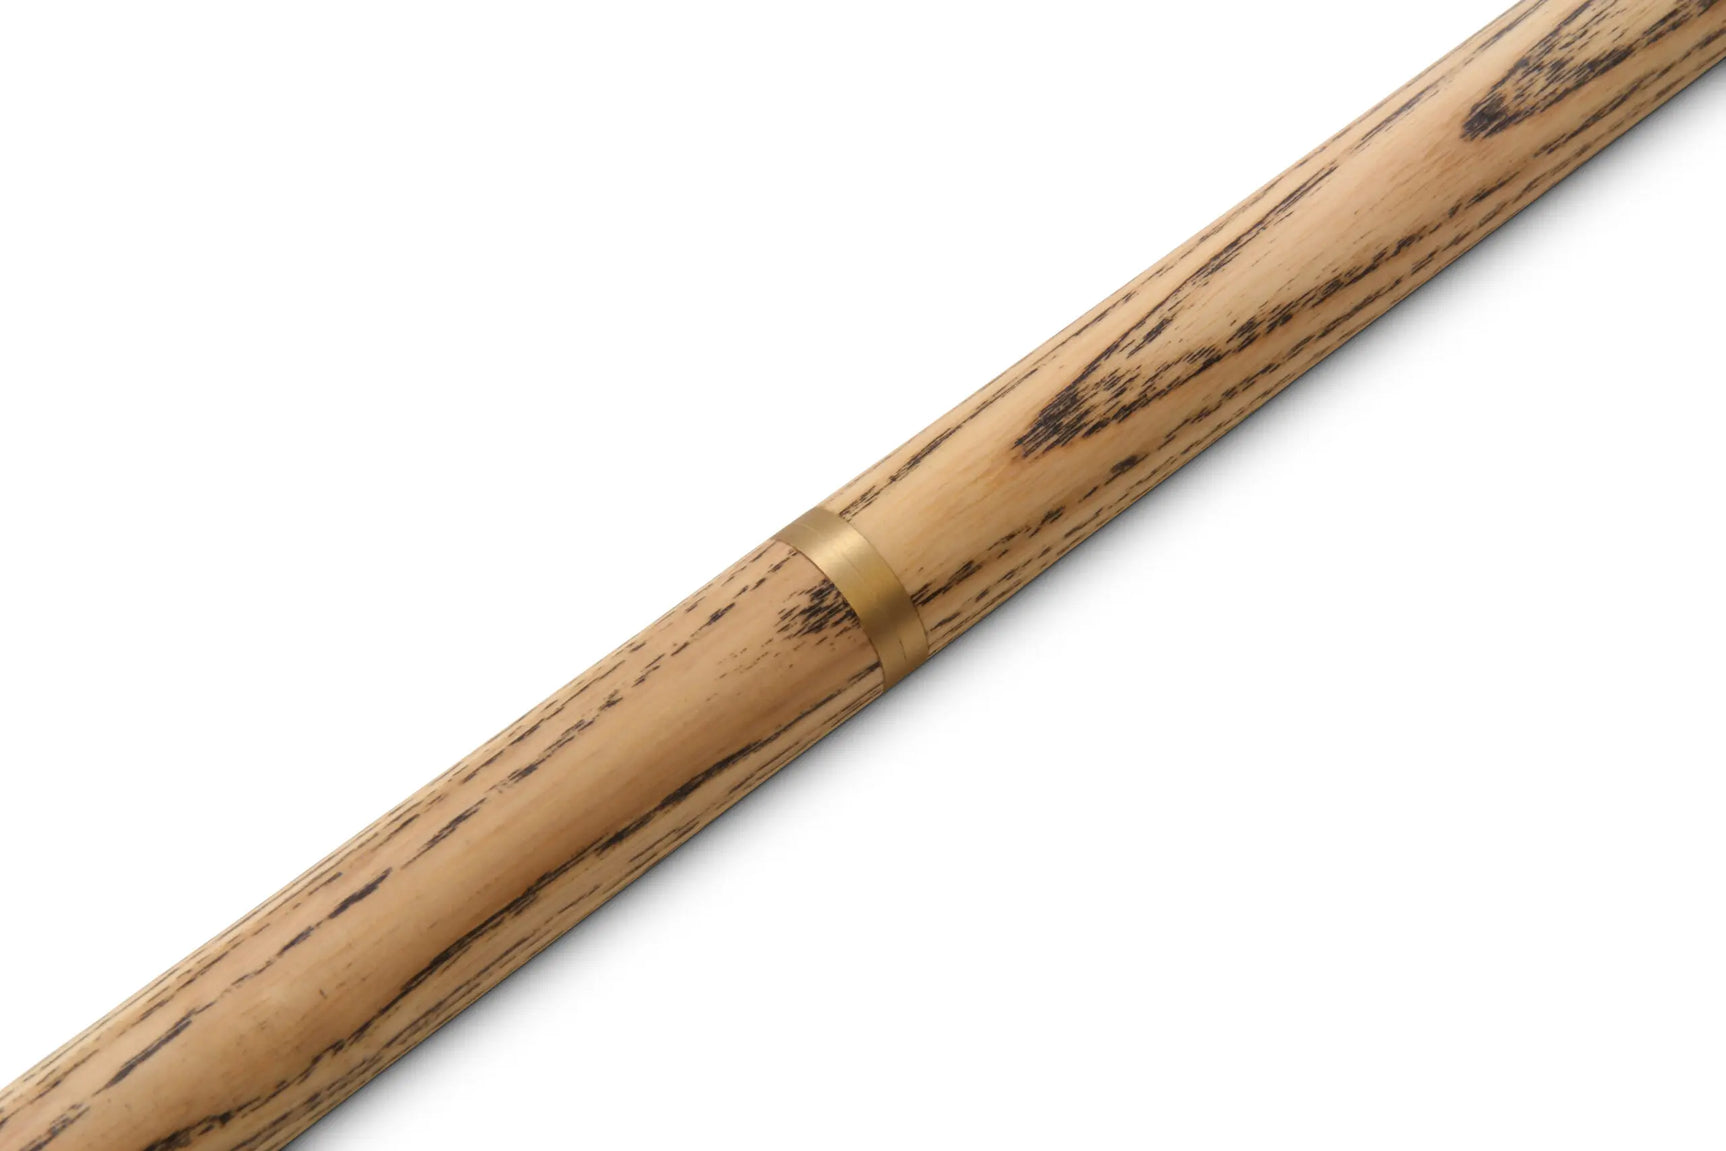 PRO147 WALNUT ASH 2 Piece Centre Joint Snooker Pool Cue with 9.5mm Tip and Extension Thread